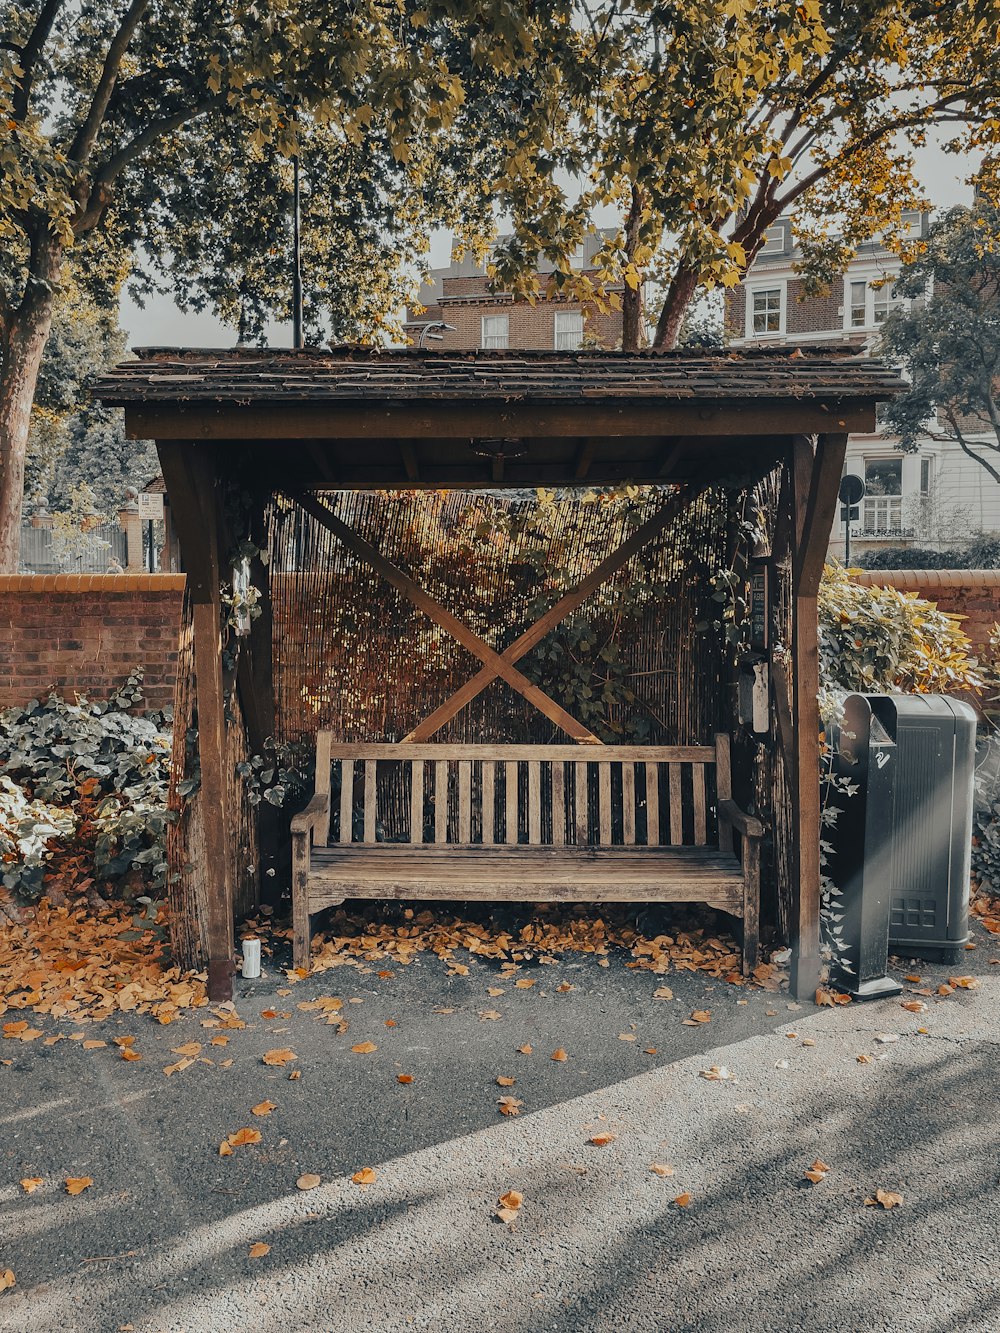 a wooden bench sitting under a tree in a park